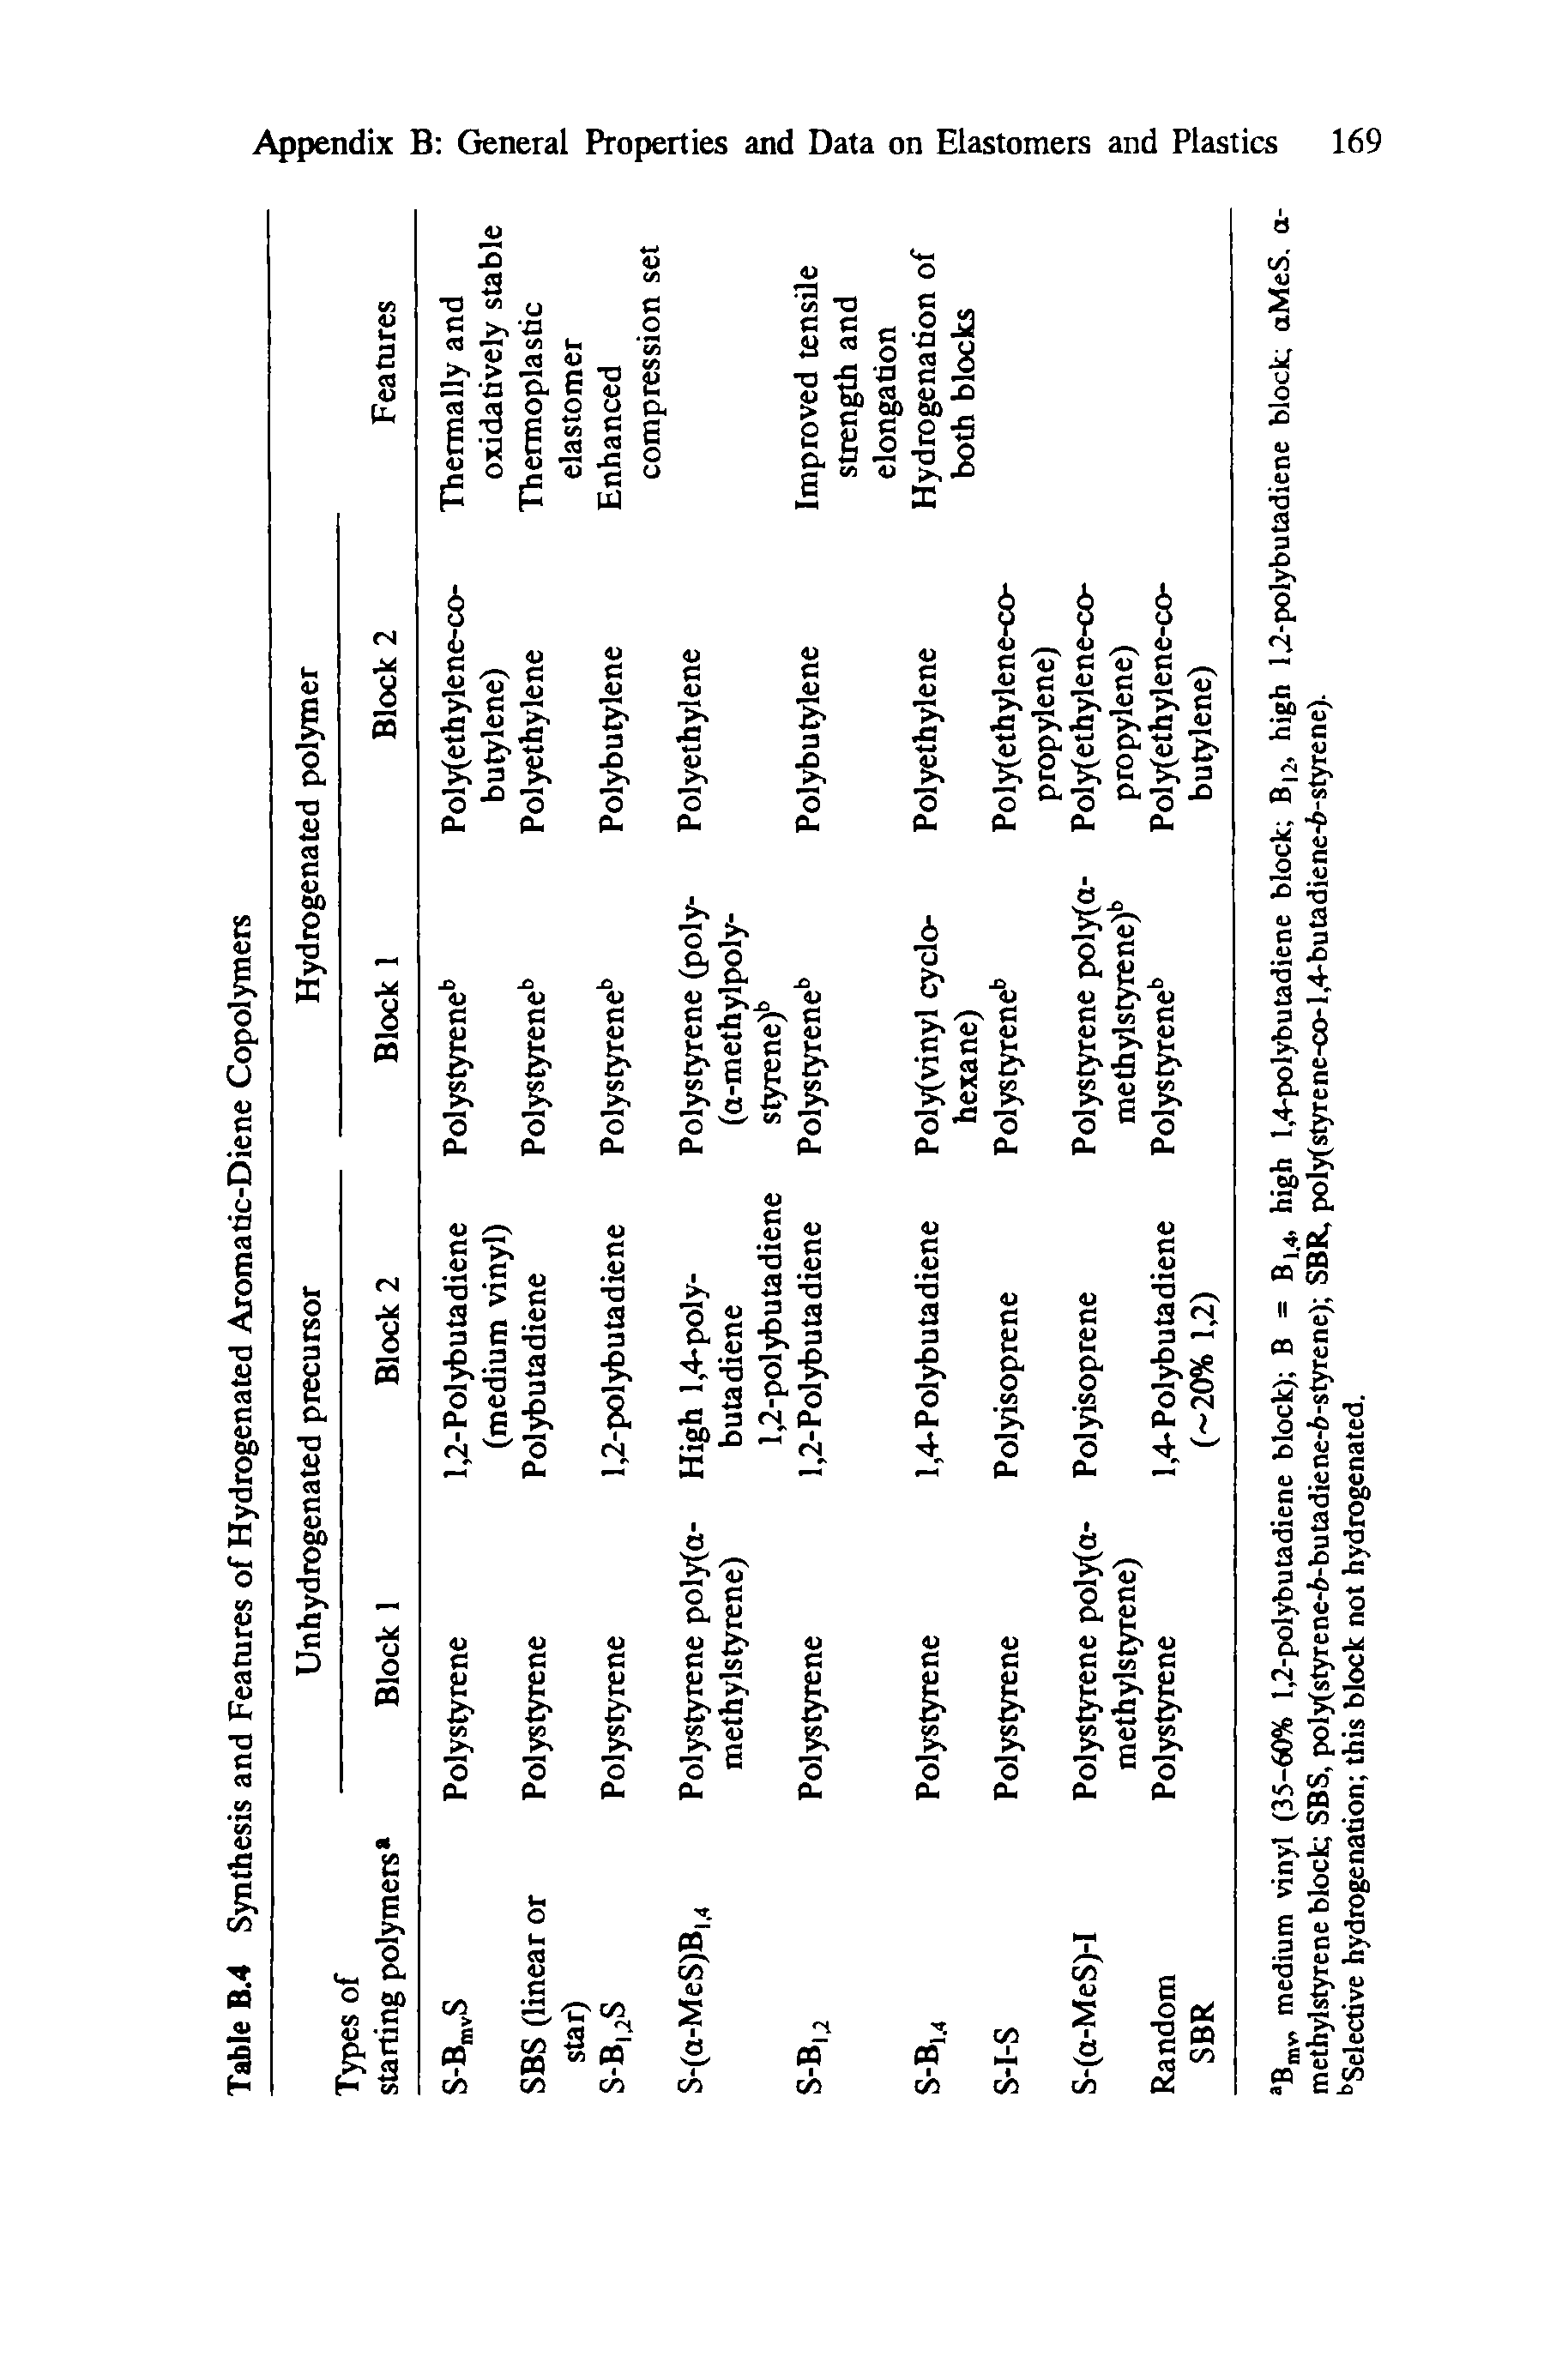 Table B.4 Synthesis and Features of Hydrogenated Aromatic-Diene Copolymers...